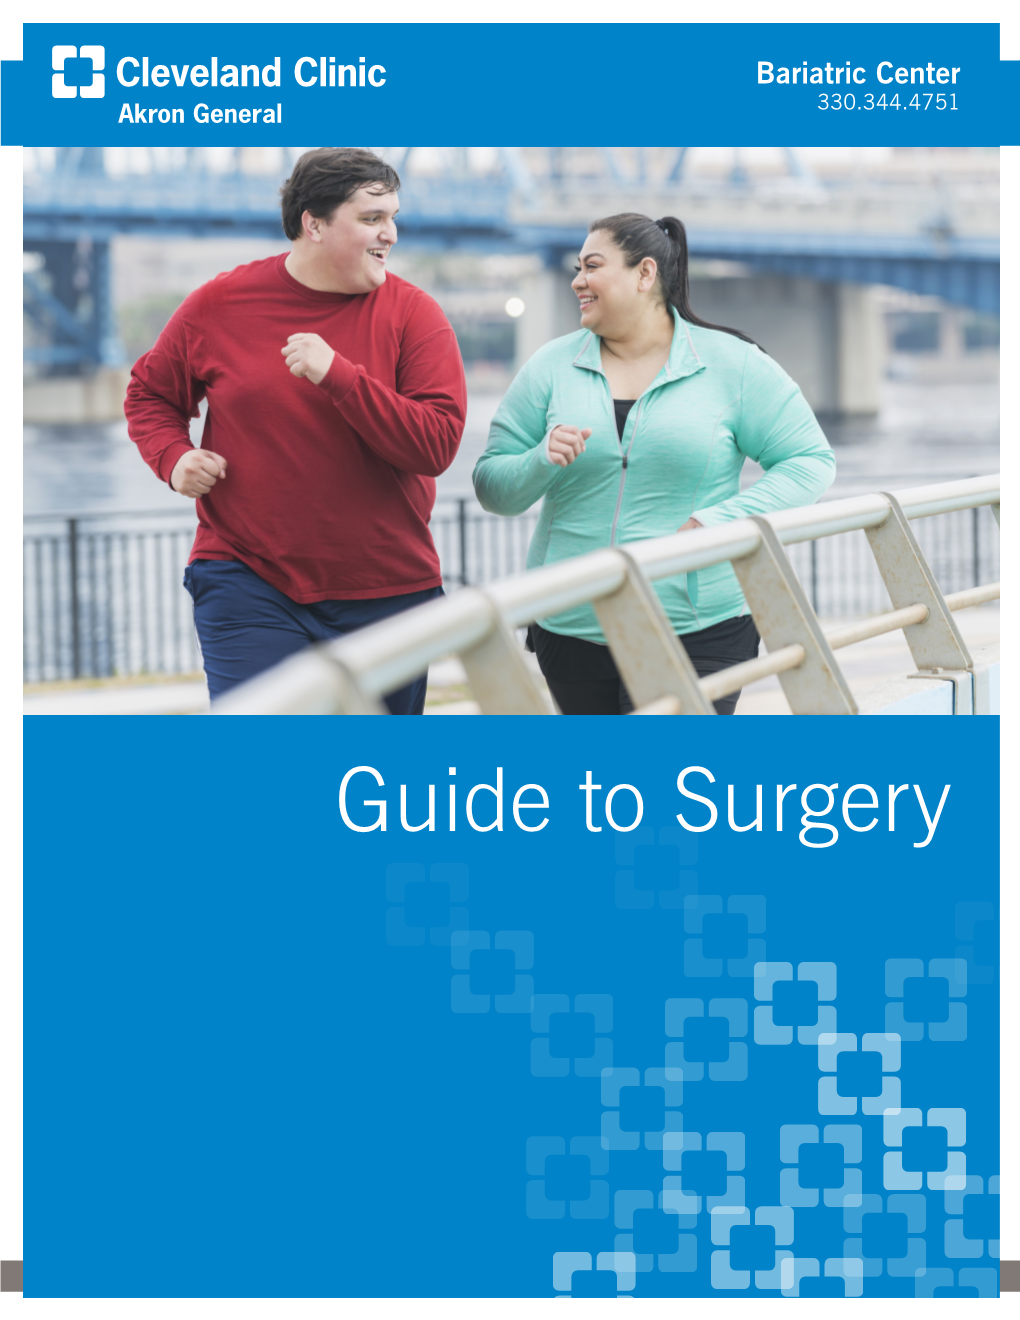 Bariatric Surgery Guide